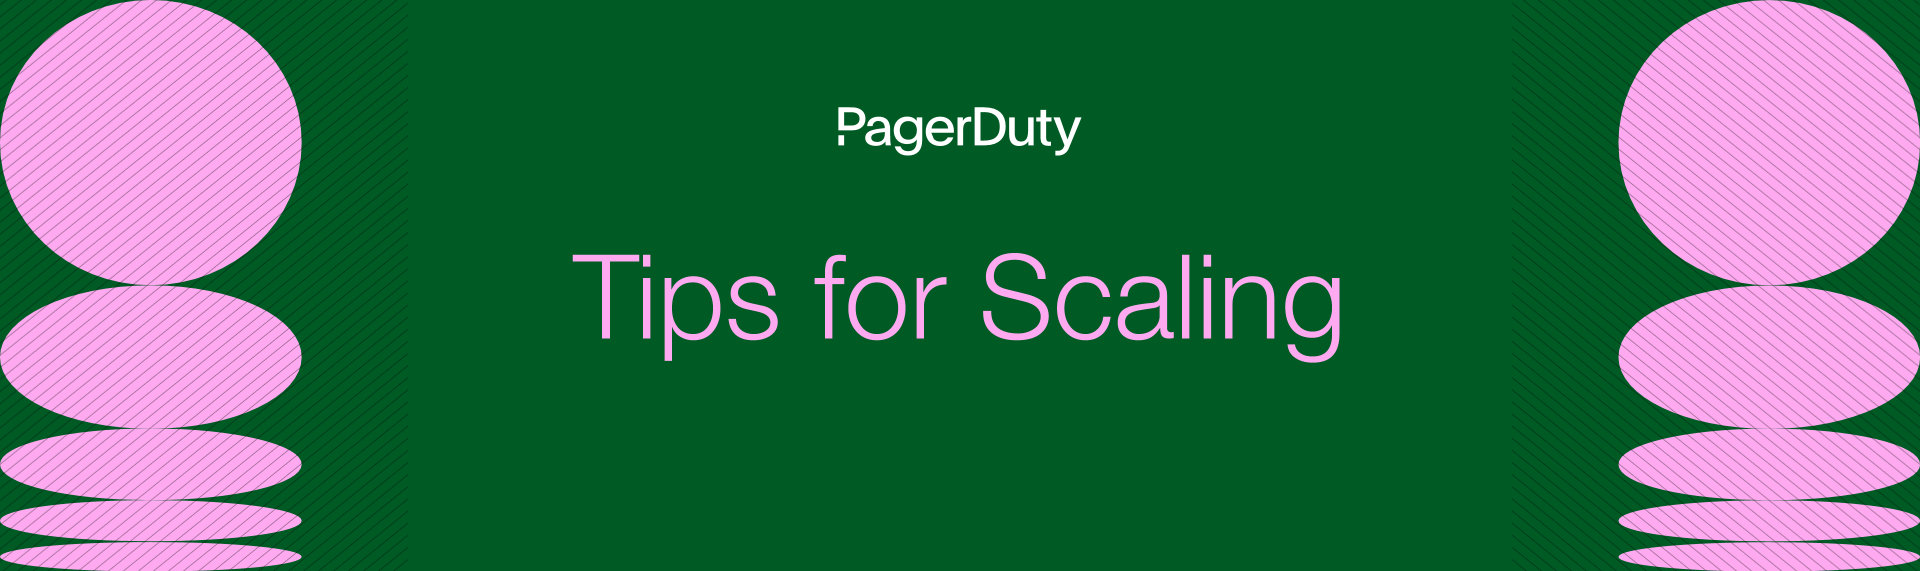 Tips for Scaling